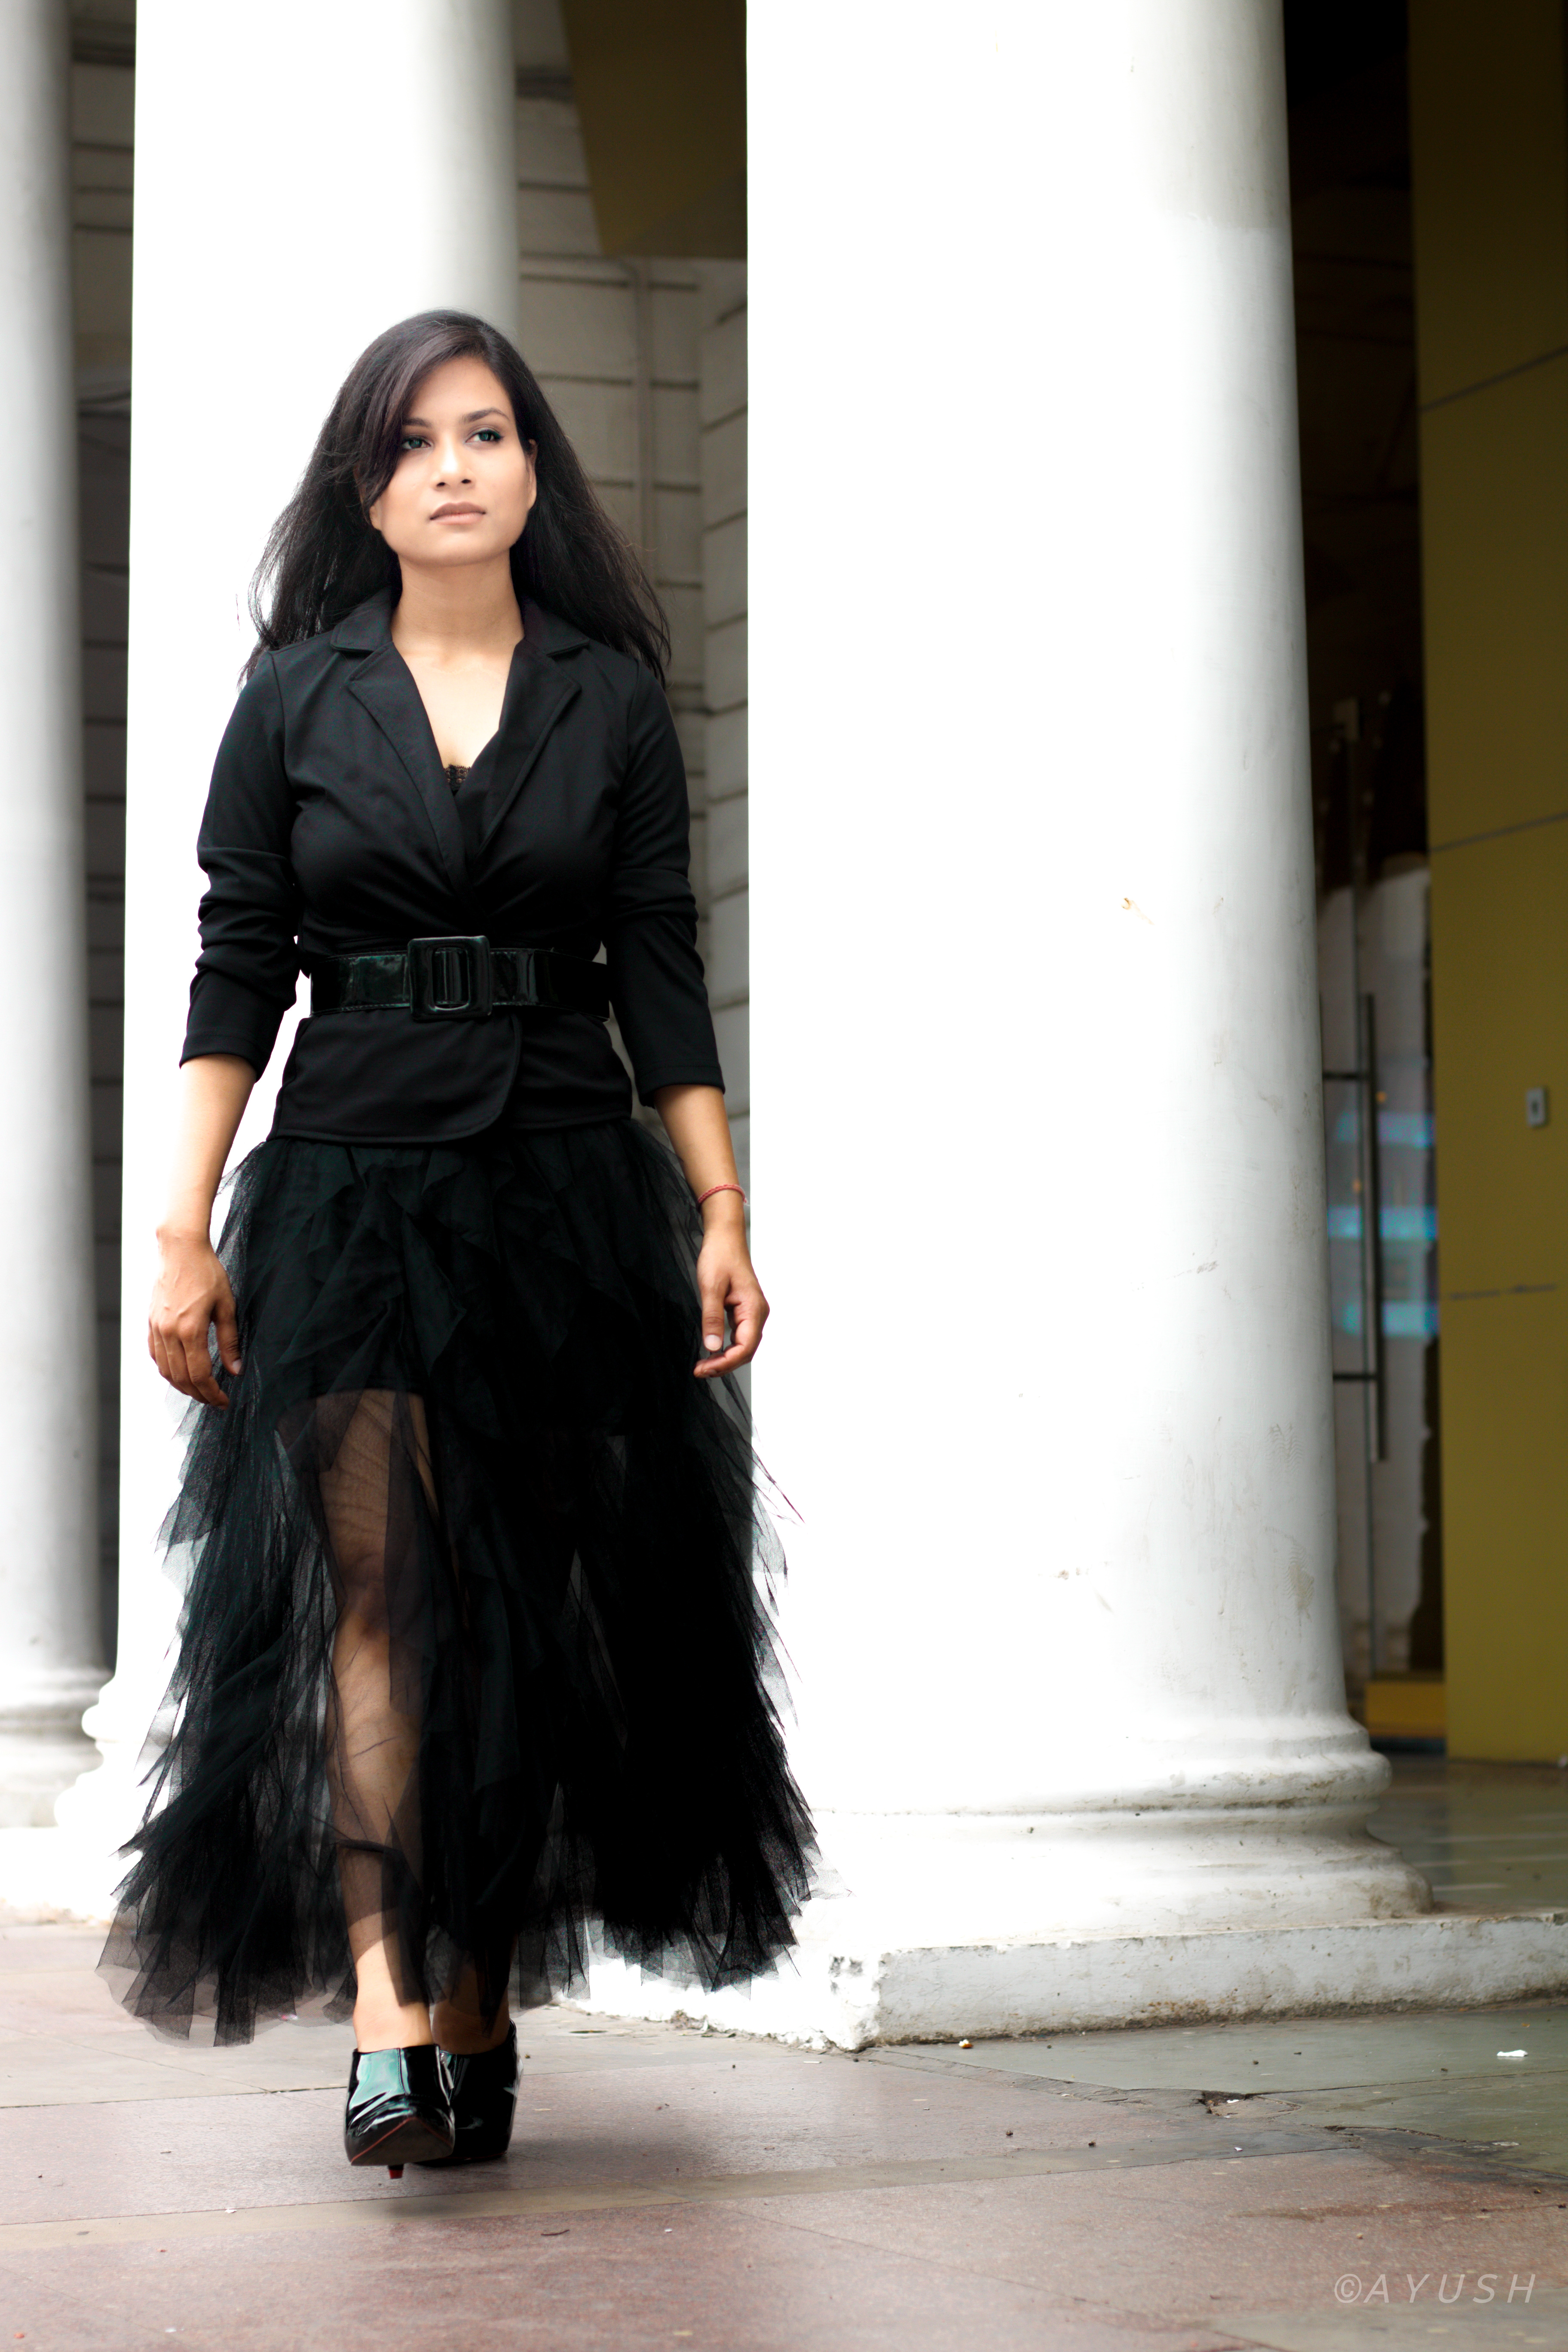 Styling the black tulle skirt with black blazer and waist belt